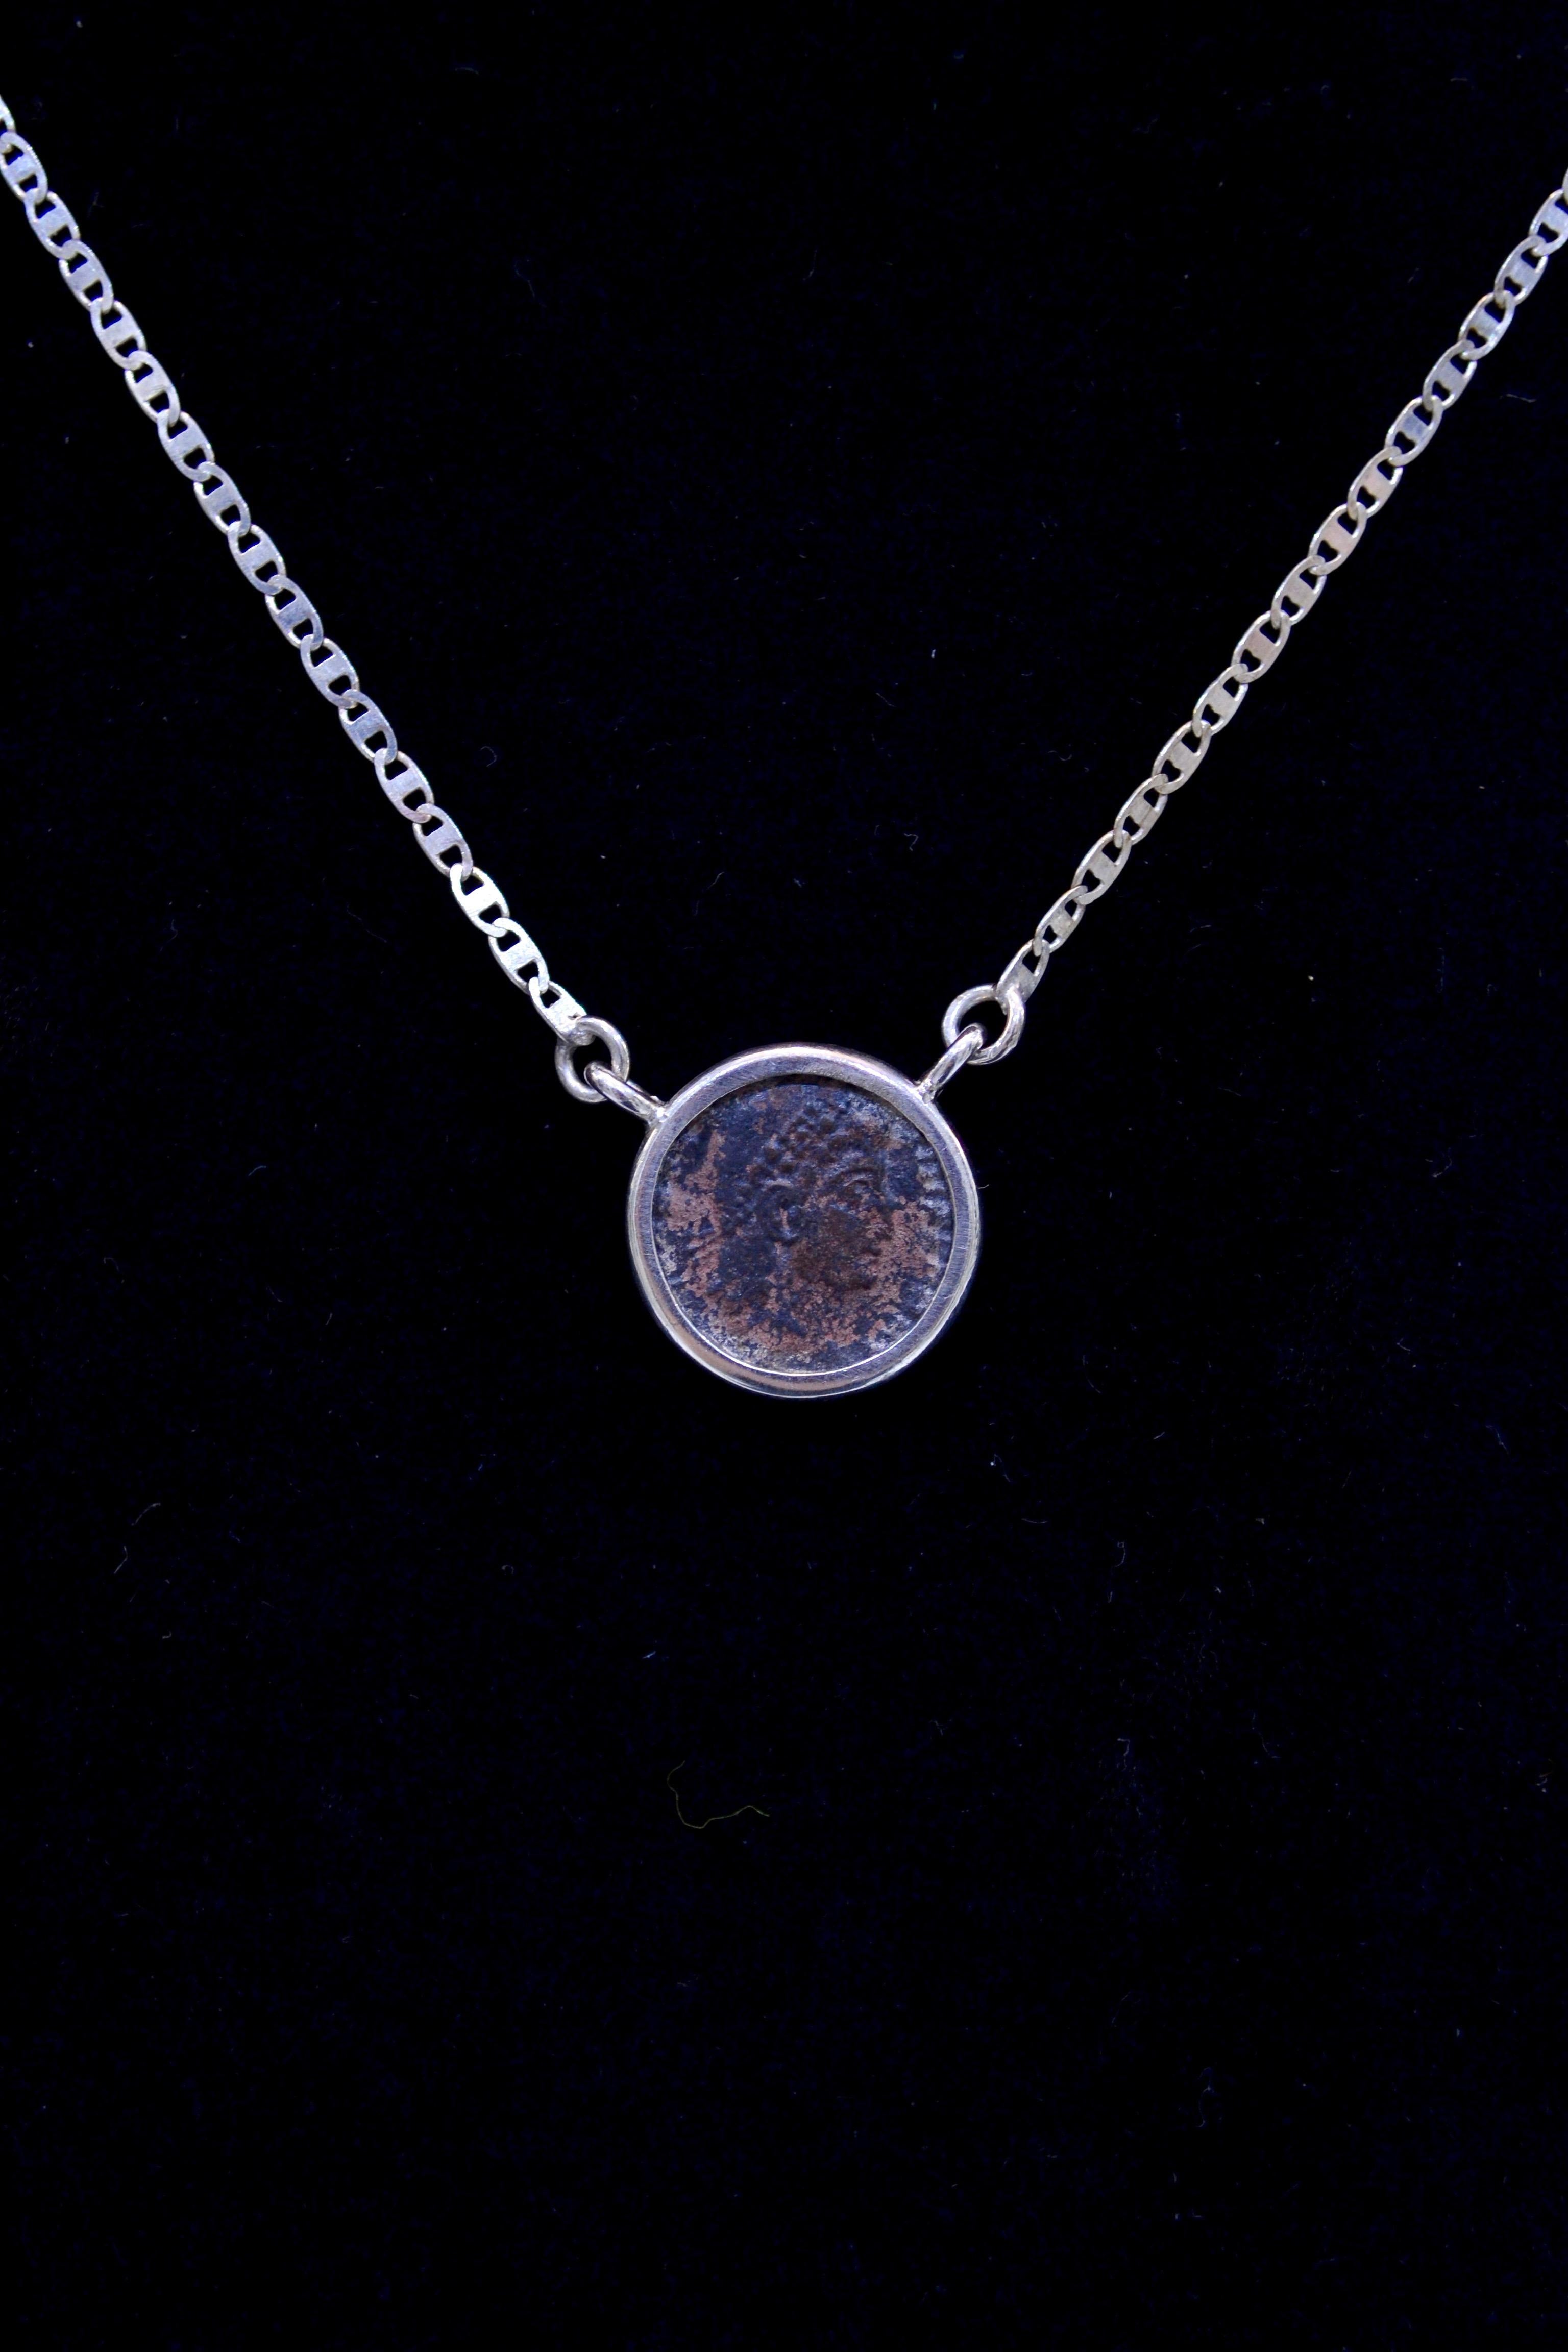 Authentic Roman bronze coin Ca. 27 BC - 476 CE mounted on contemporary silver necklace. Ready to be worn!

Bronze coin from the great Roman Empire that dates back nearly 2,000 years.  